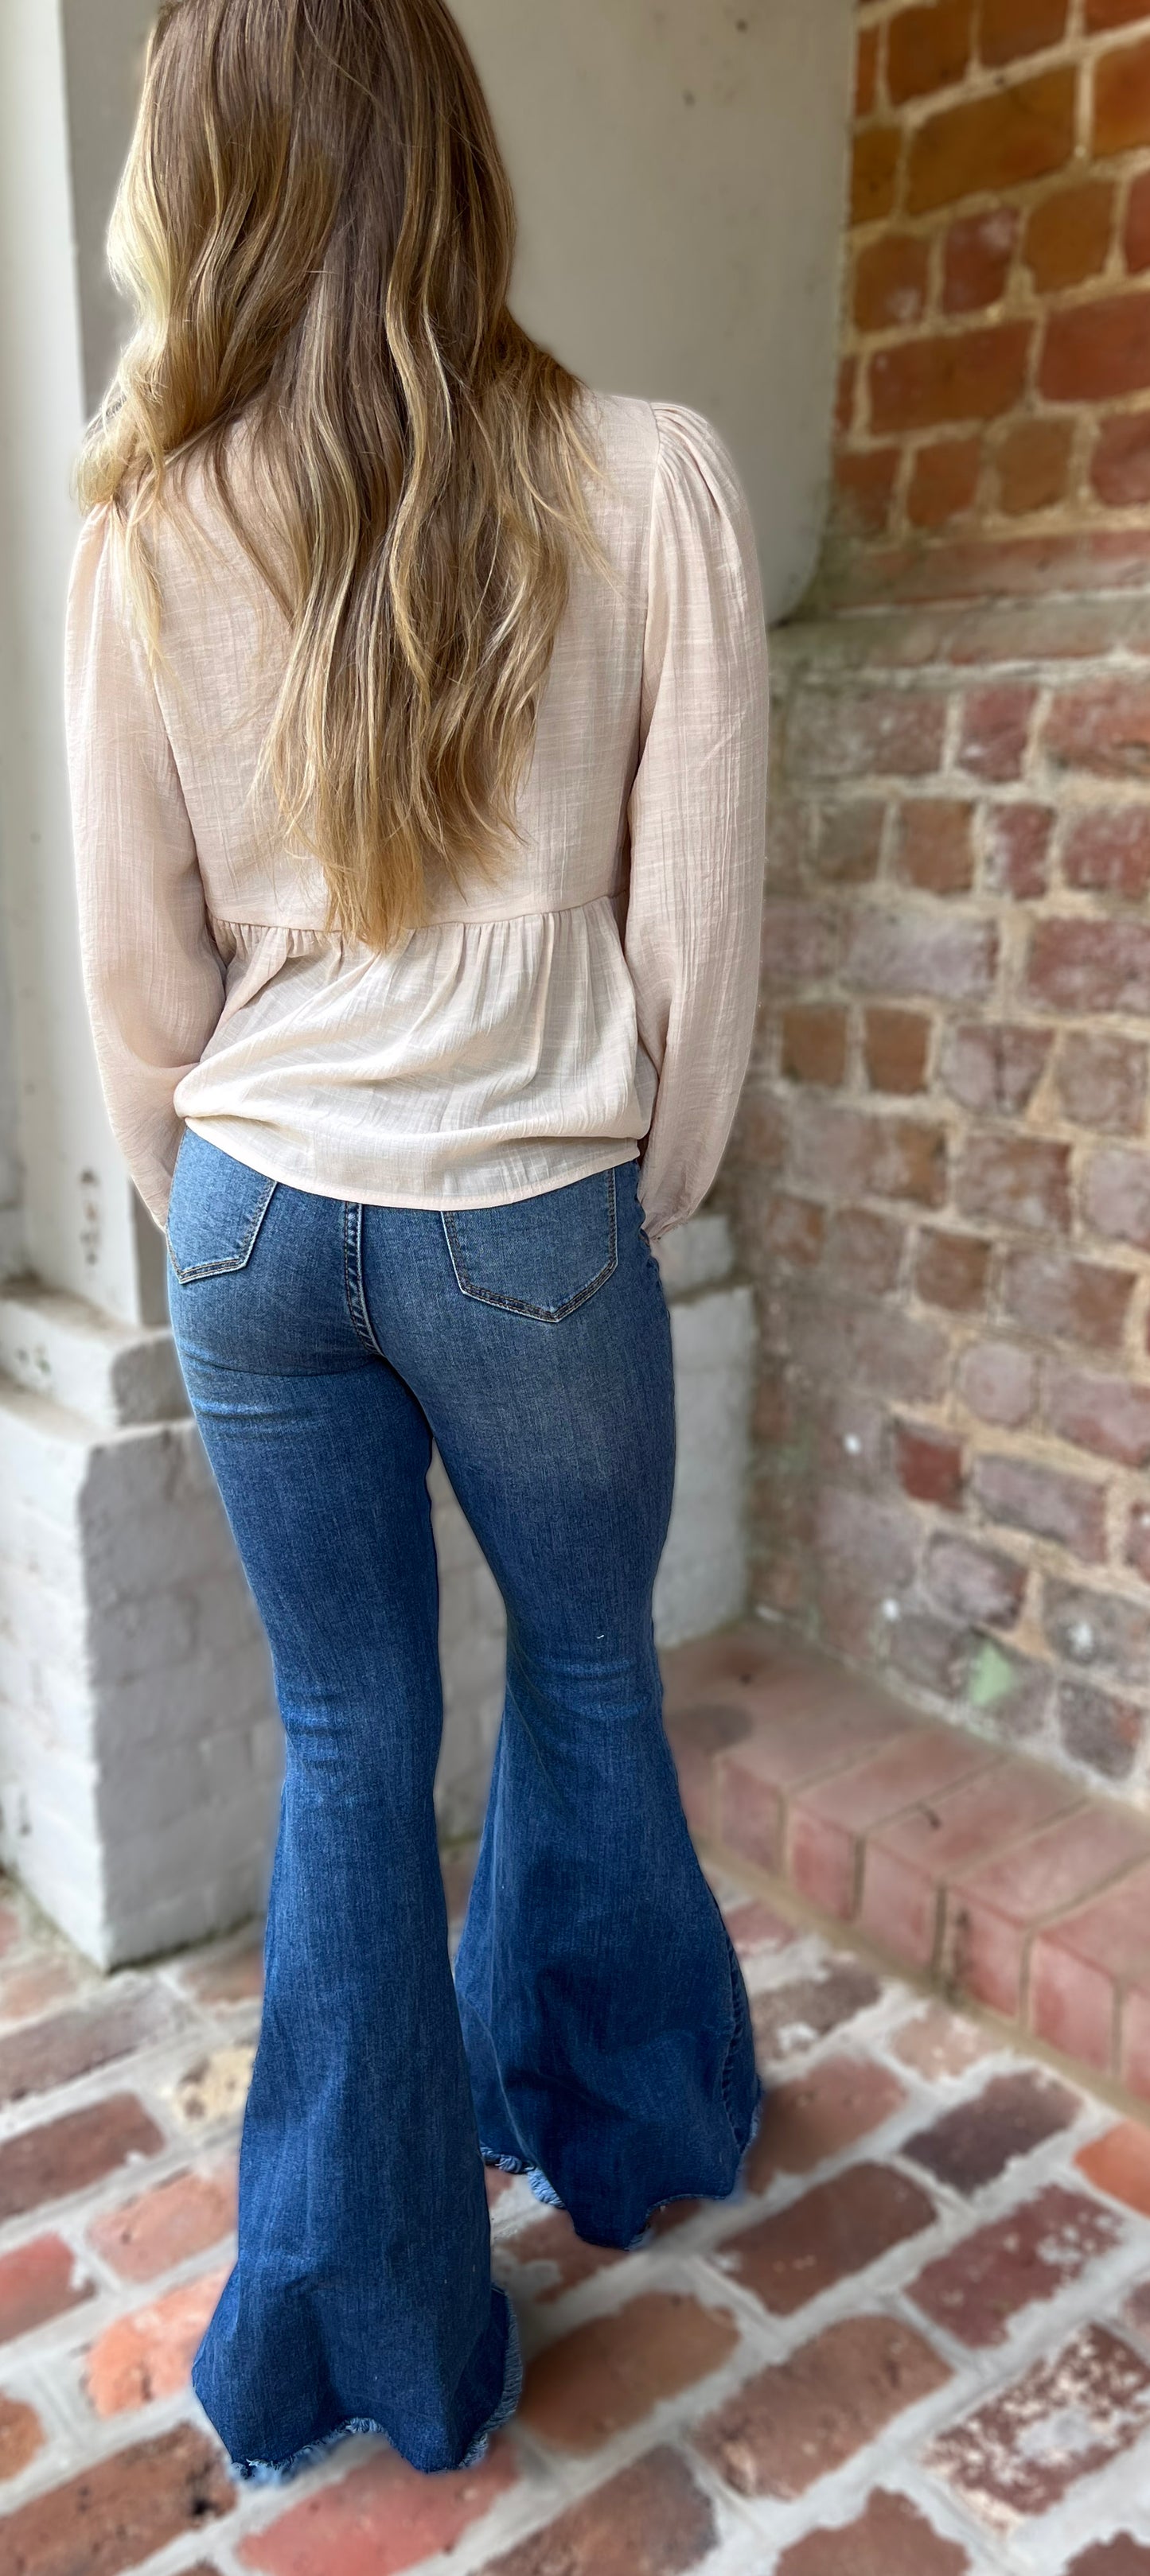 Kenzie's Super Flare Jeans